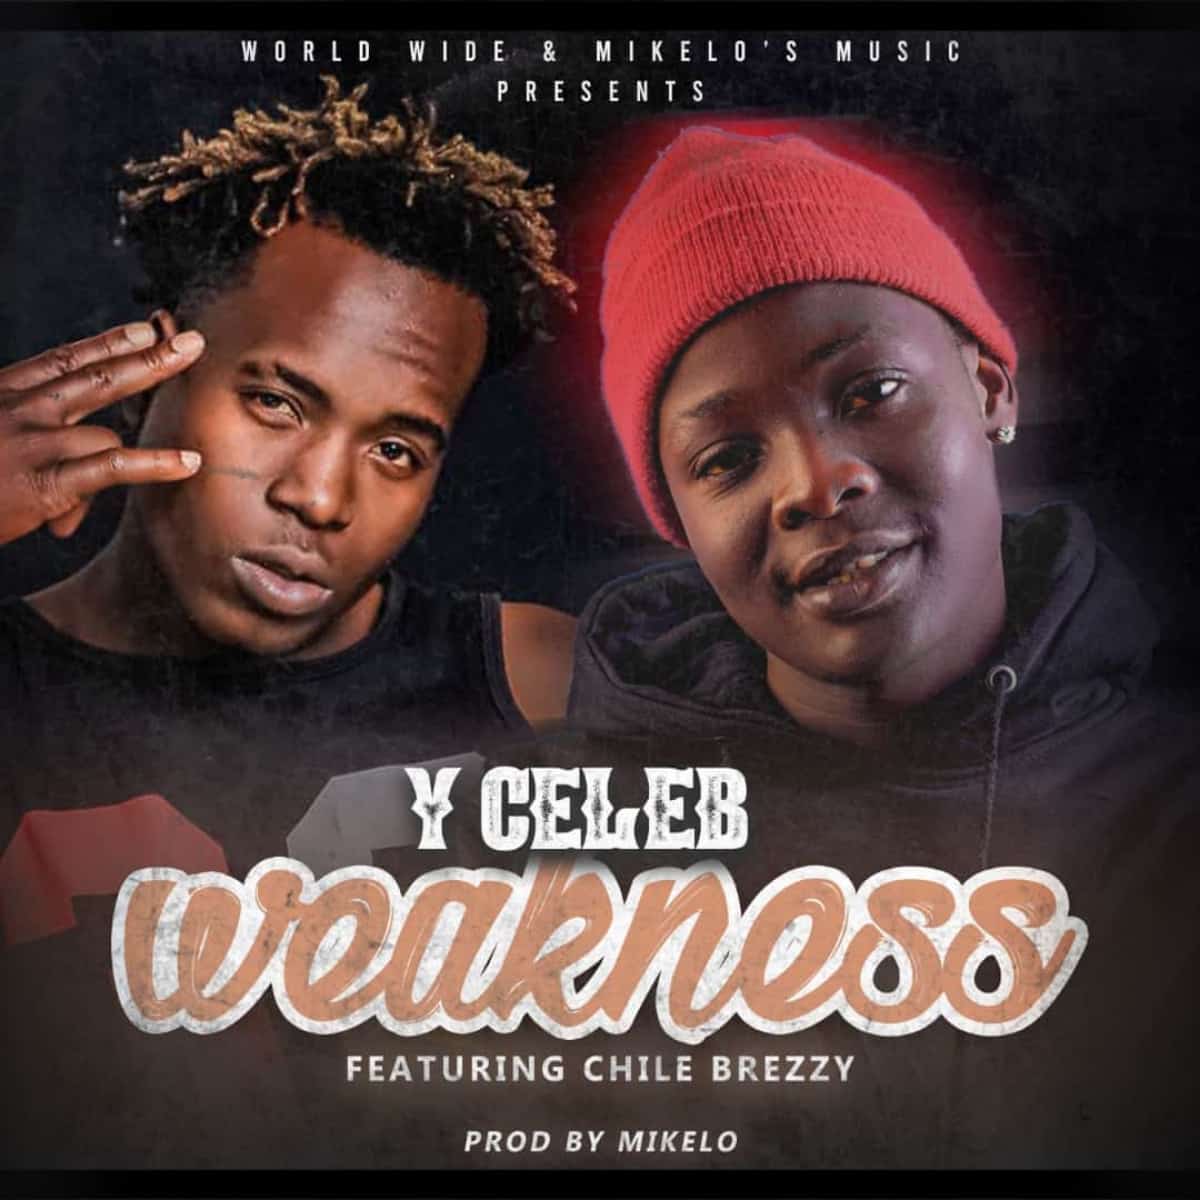 DOWNLOAD Y Celeb Feat Chile Breezy “WeaKness” Mp3 » MUSIC